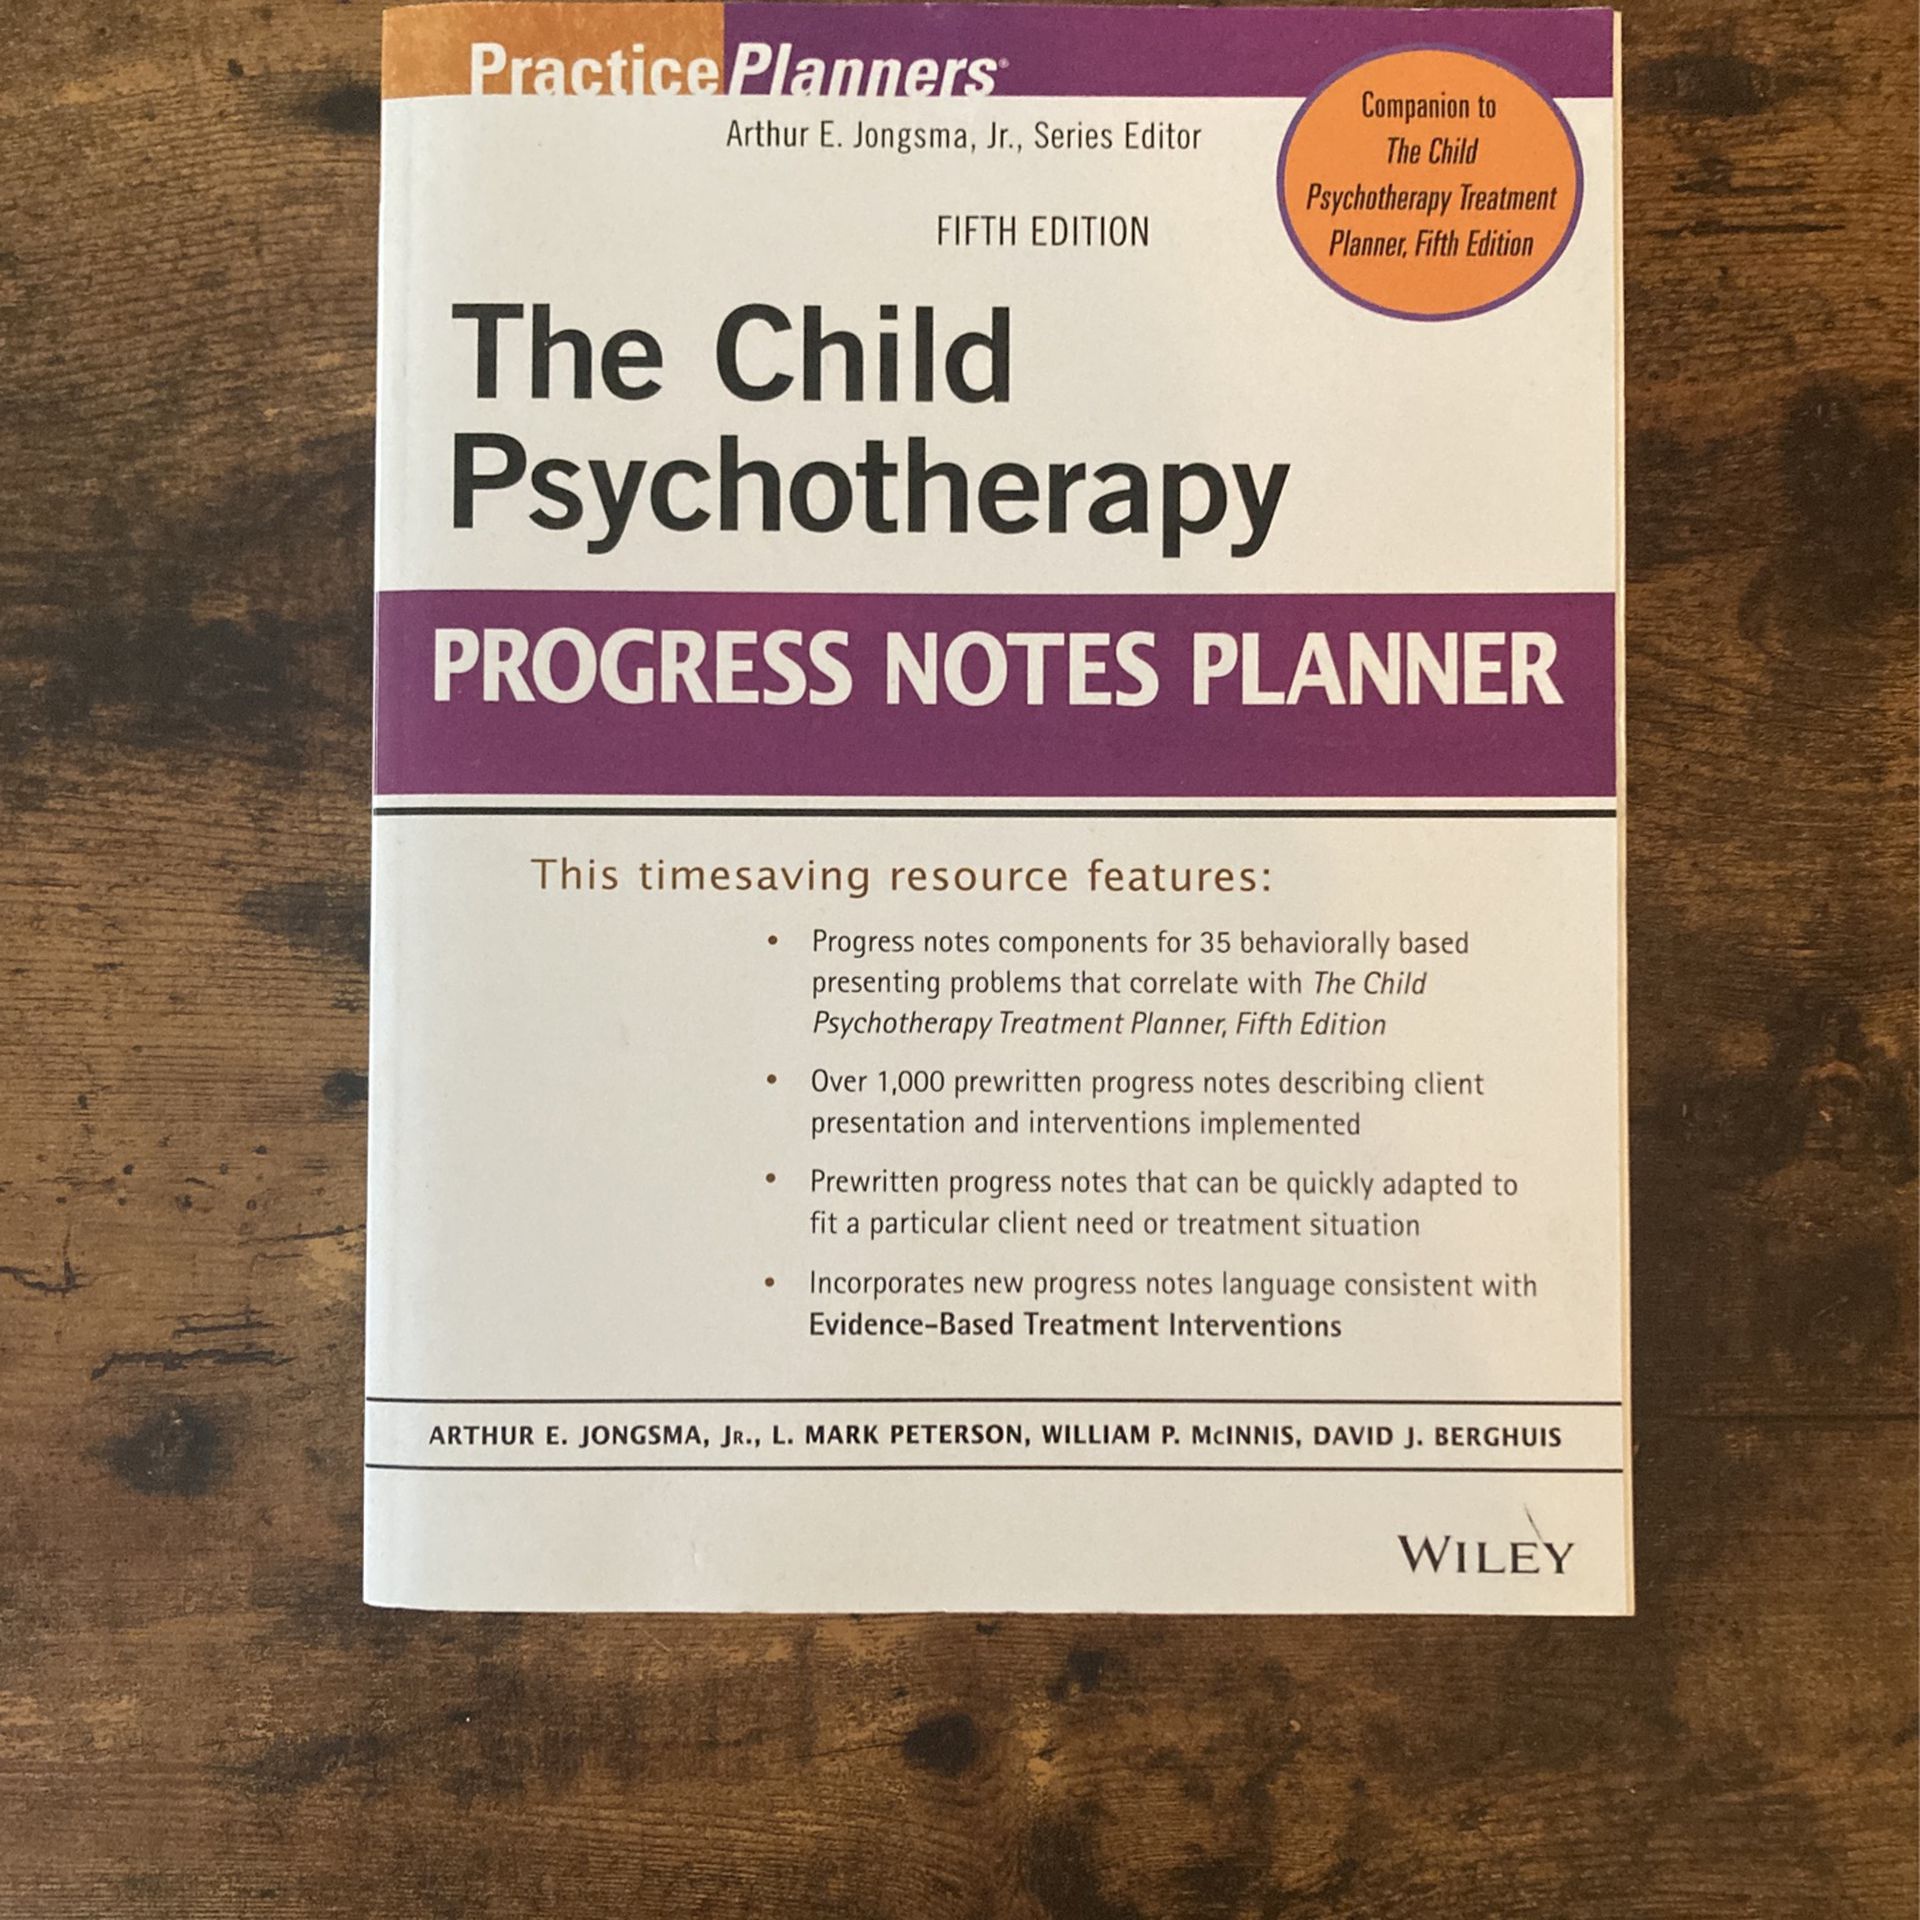 5th Edition Progress Notes Planner (Wiley)